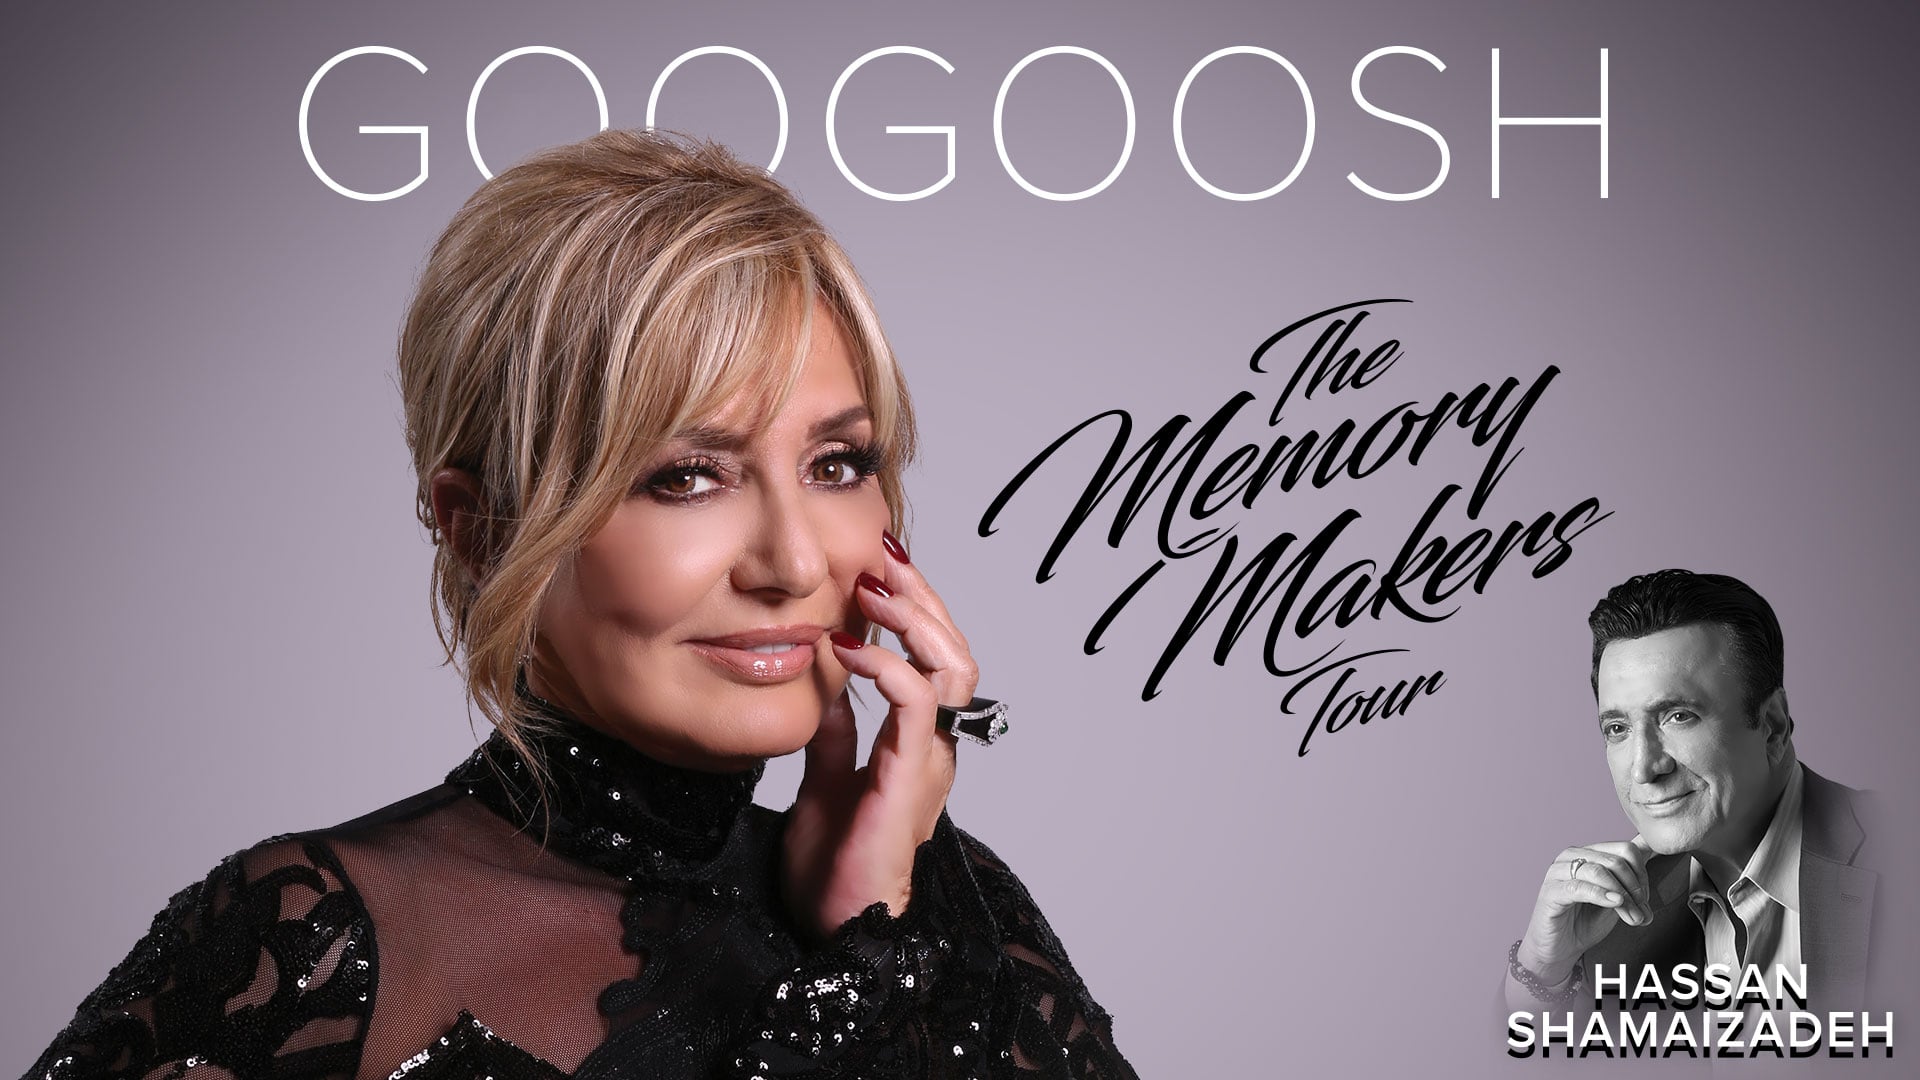 Googoosh Live at Hollywood Bowl Persian Movie Streaming Online Watch